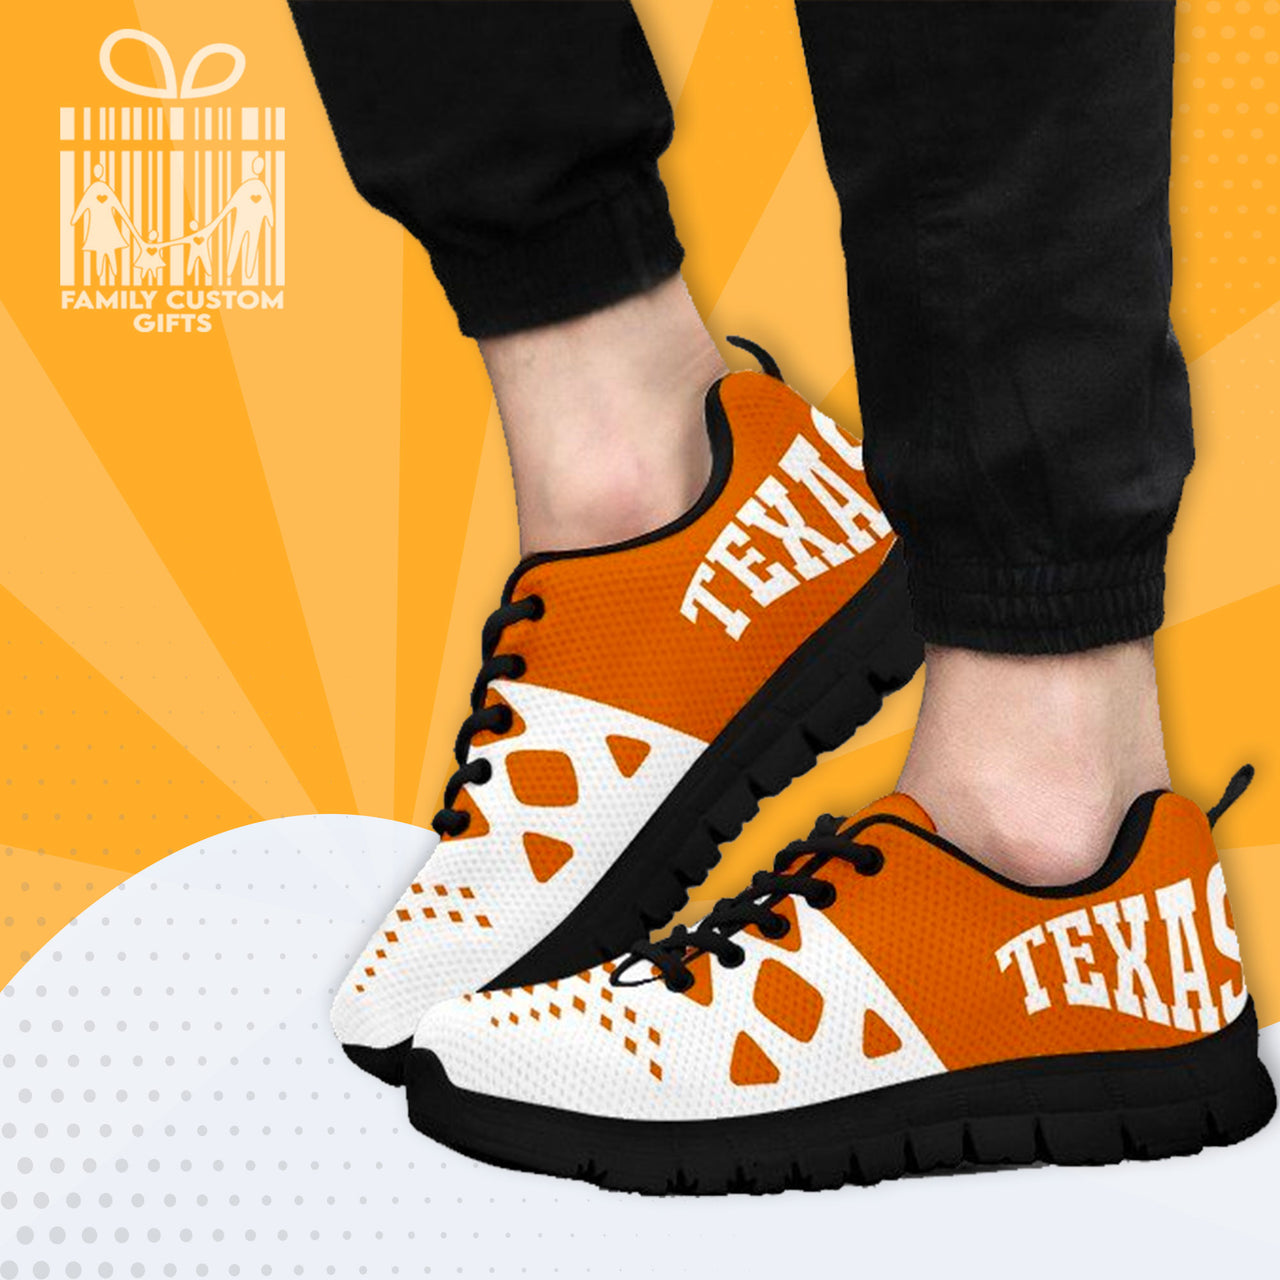 Texas Custom Shoes for Men Women 3D Print Fashion Sneaker Gifts for Her Him